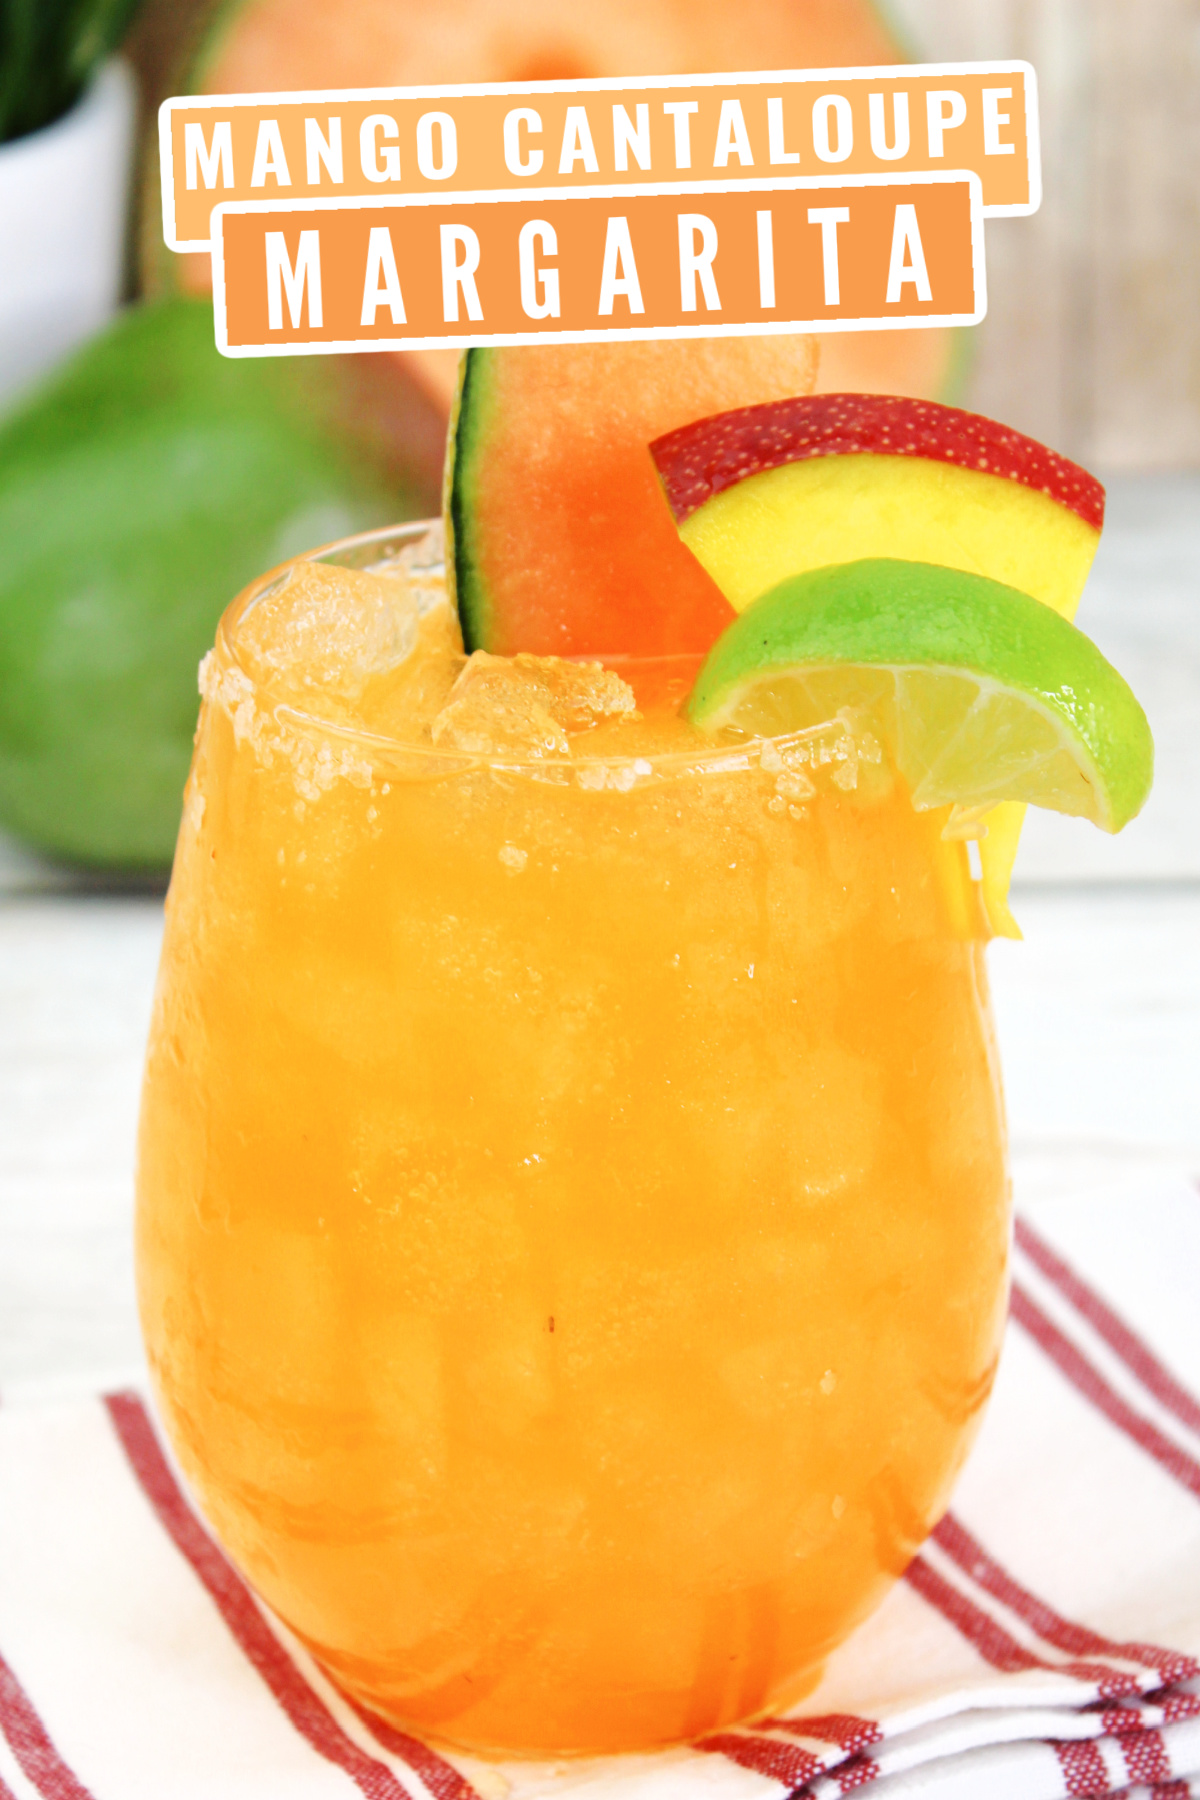 Beat the summer heat with a twist on traditional margaritas! Our Mango Cantaloupe Margarita is the perfect refreshing drink to try!